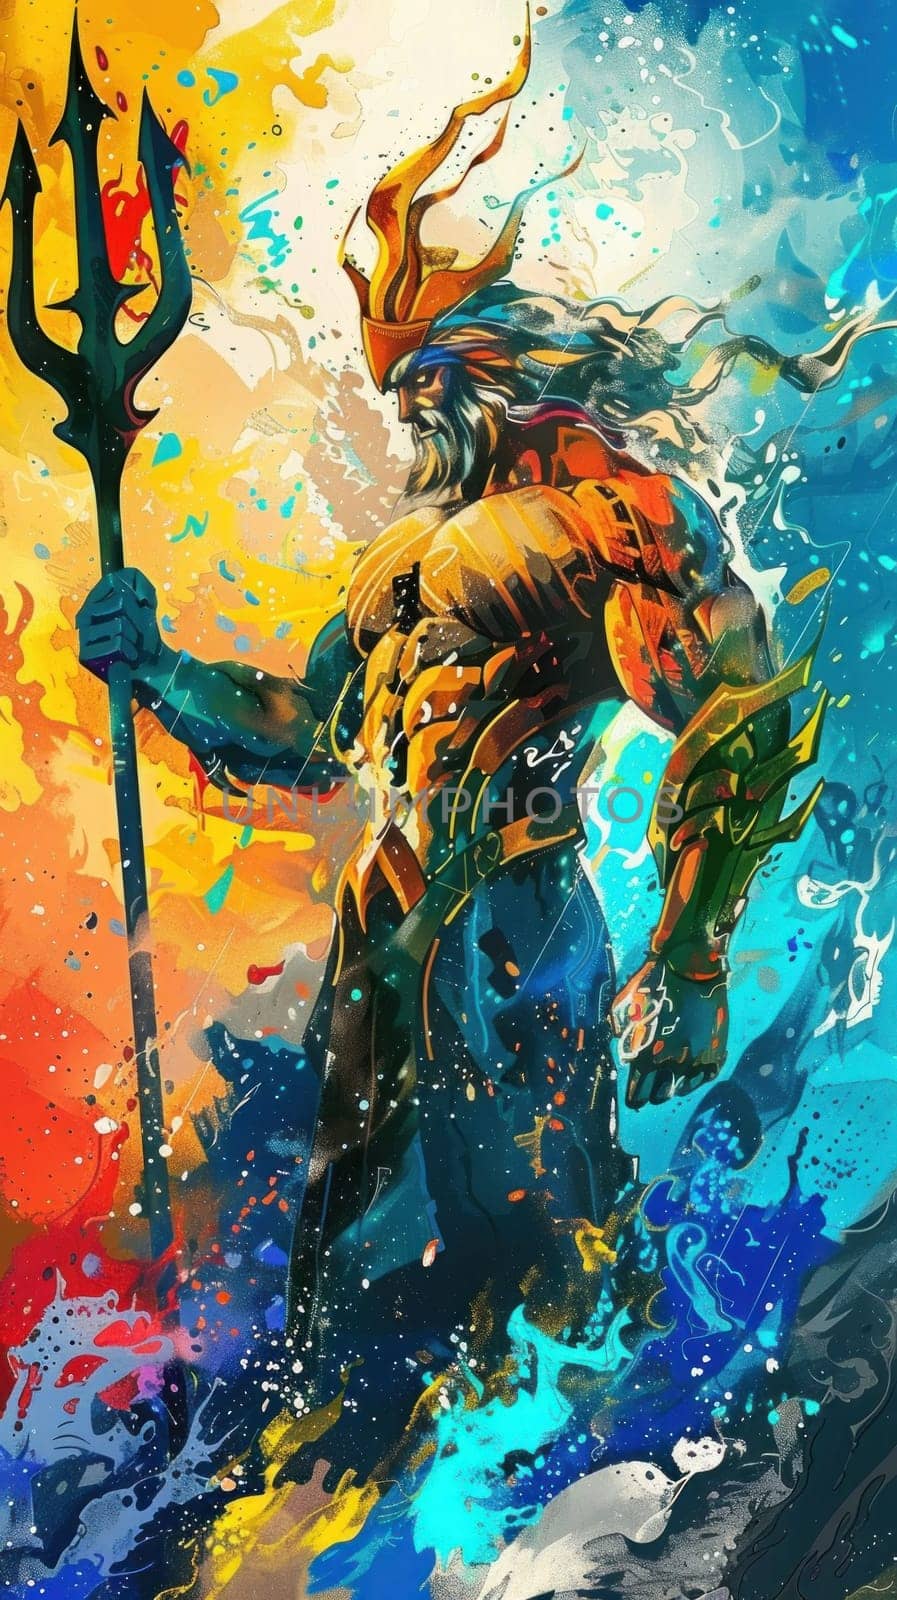 Poseidon with a trident is standing in a painting with a splash of color. The painting is abstract and the man is the main focus